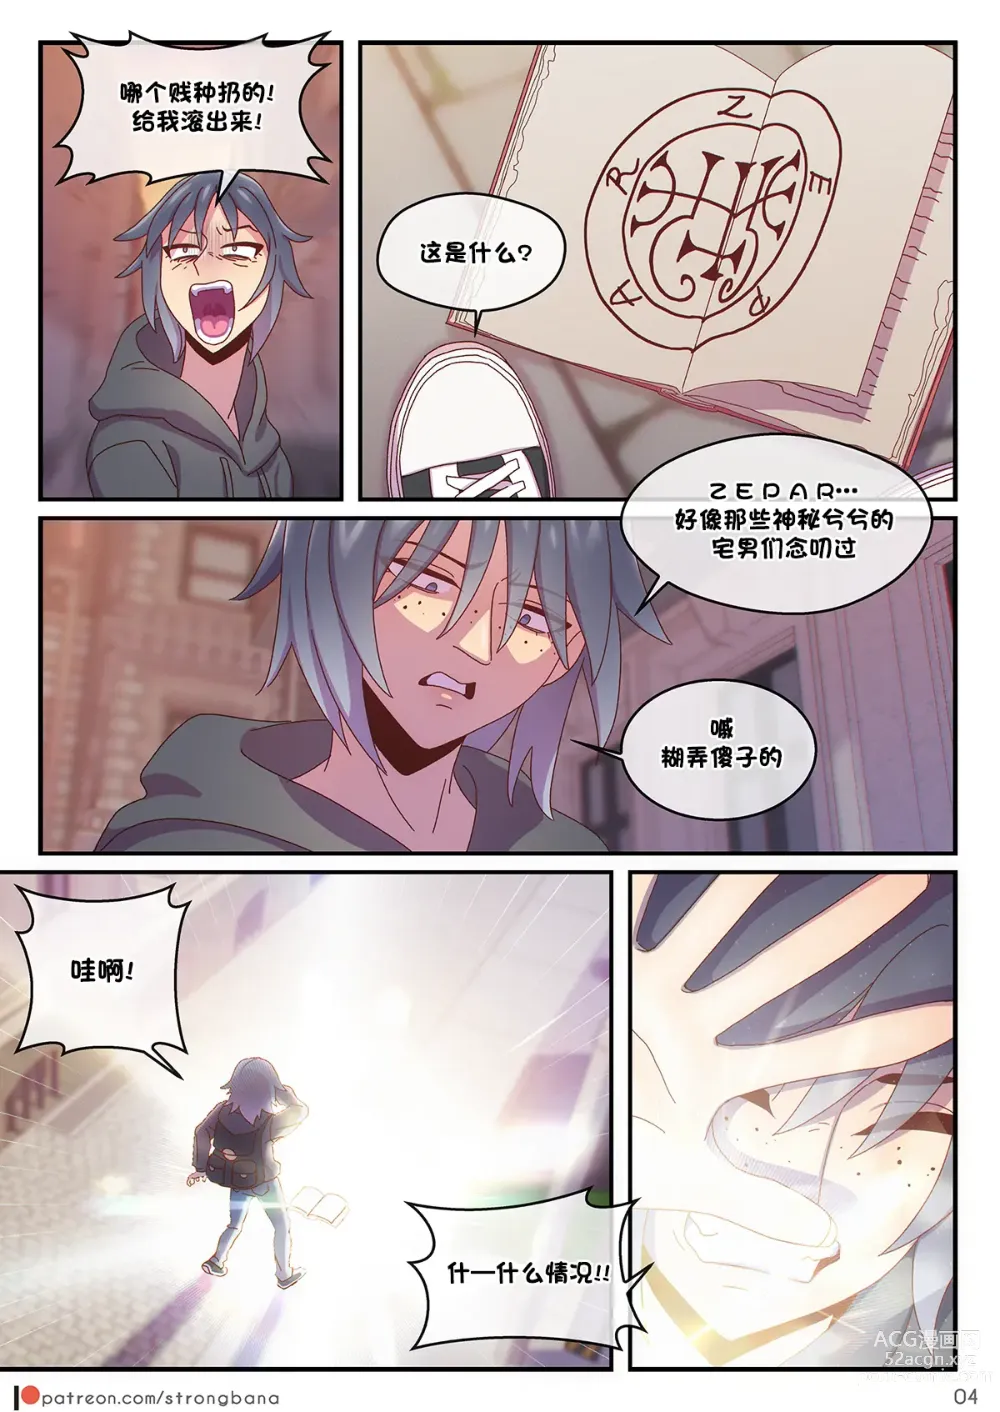 Page 6 of doujinshi JUST 666$